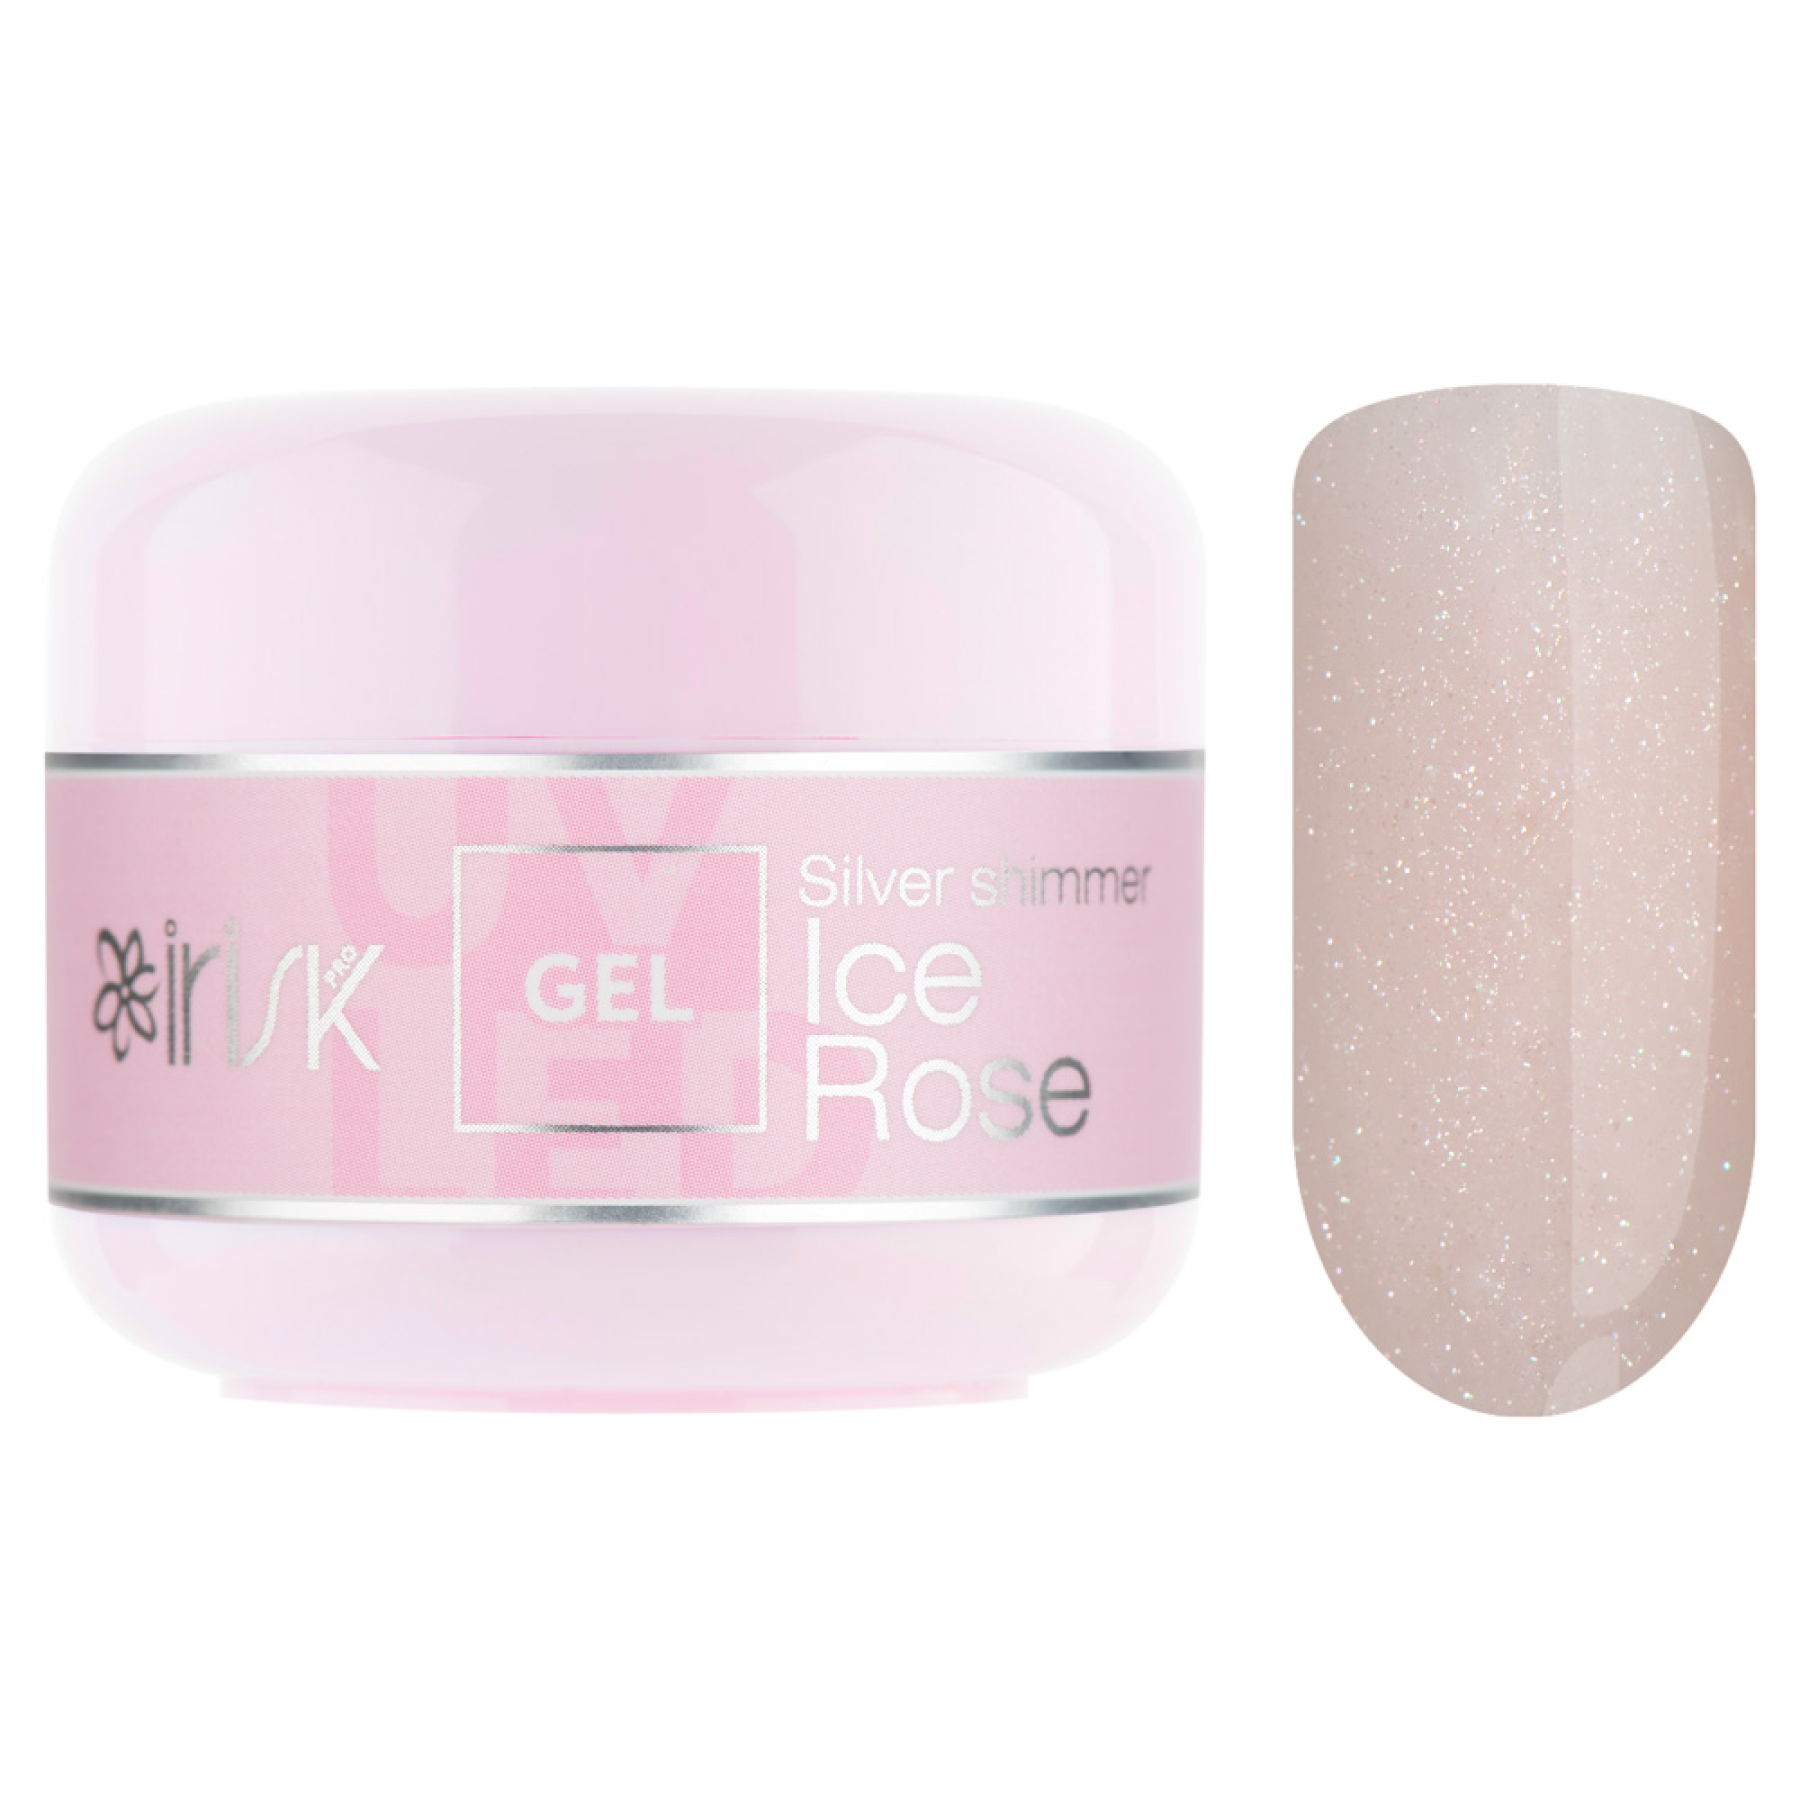 Гель ABC Limited collection 16 Ice Rose Silver shimmer, 15мл